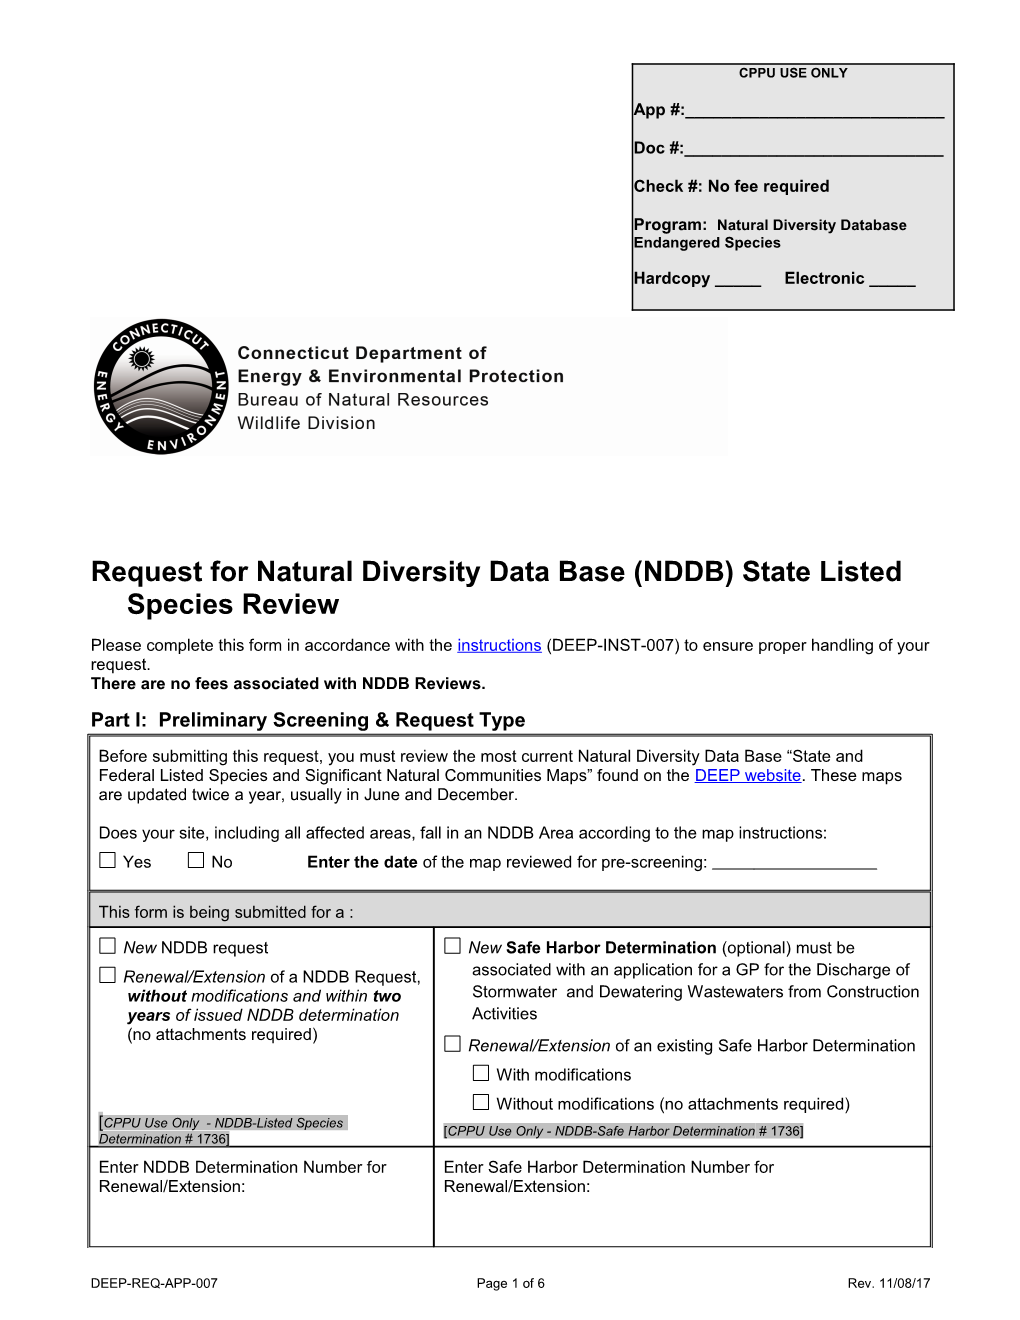 Request for Natural Diversity Data Base (NDDB) State Listed Species Review